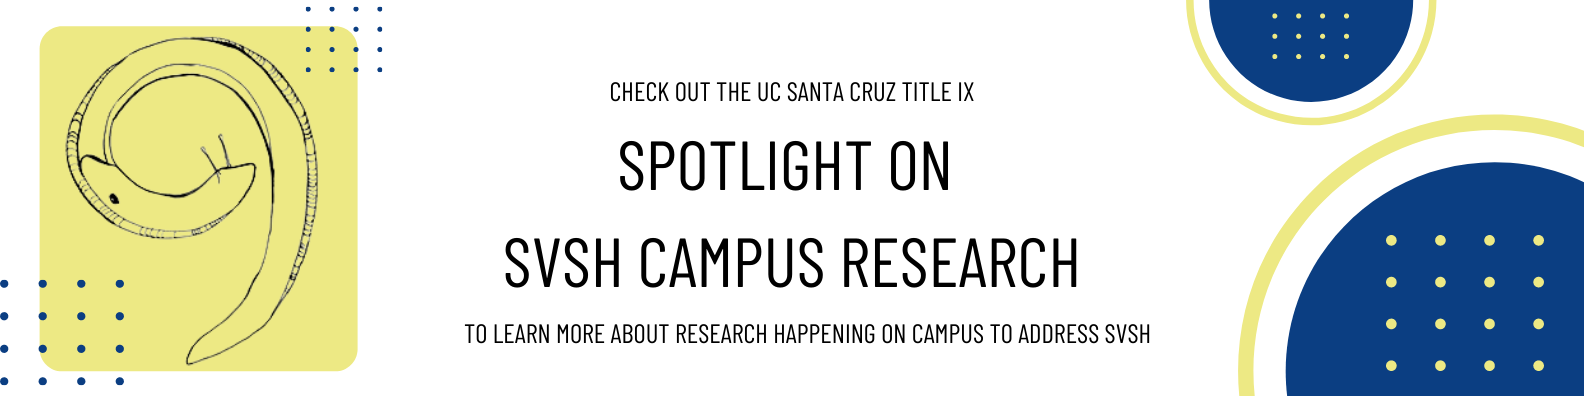 Check out the UC Santa Cruz Title IX Spotlight on SVSH Campus Research to learn more about research happening on campus to address SVSH